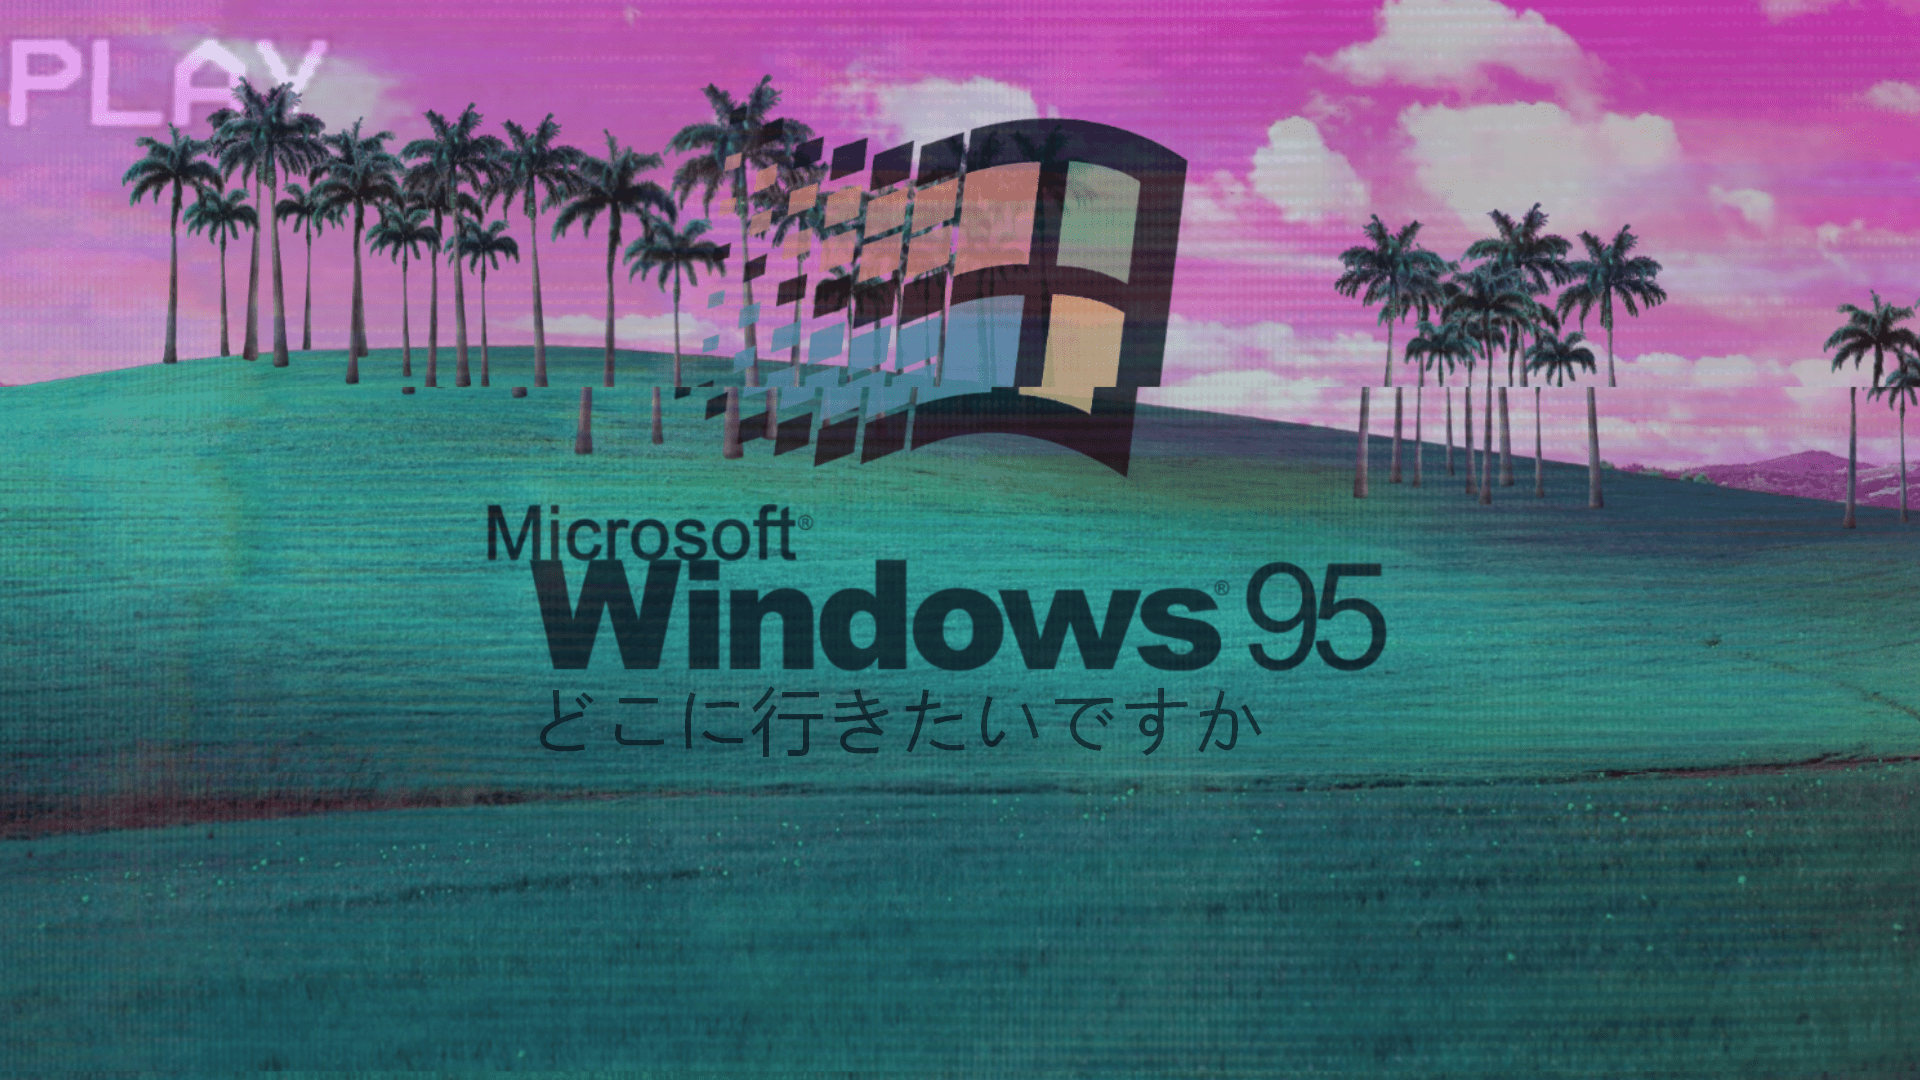 Windows 95 wallpaper with palm trees and a sunset - Computer, 1920x1080, plants, technology, Japanese, VHS, HD, profile picture, Windows 95, glitch